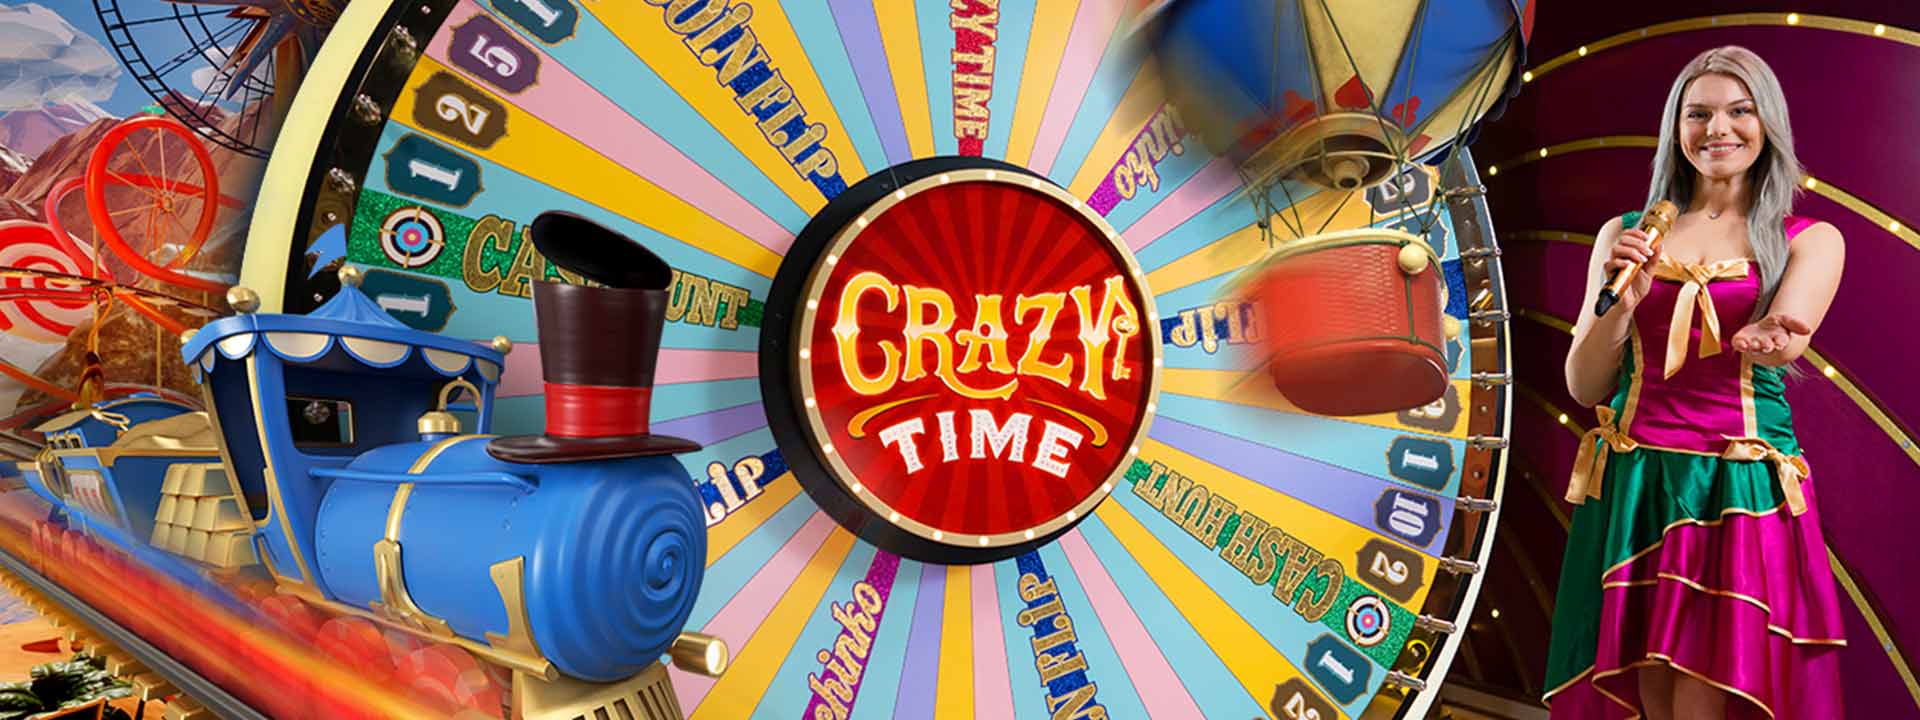 Why Crazy Time Can Be Considered The Best Ultimate Live Game Show